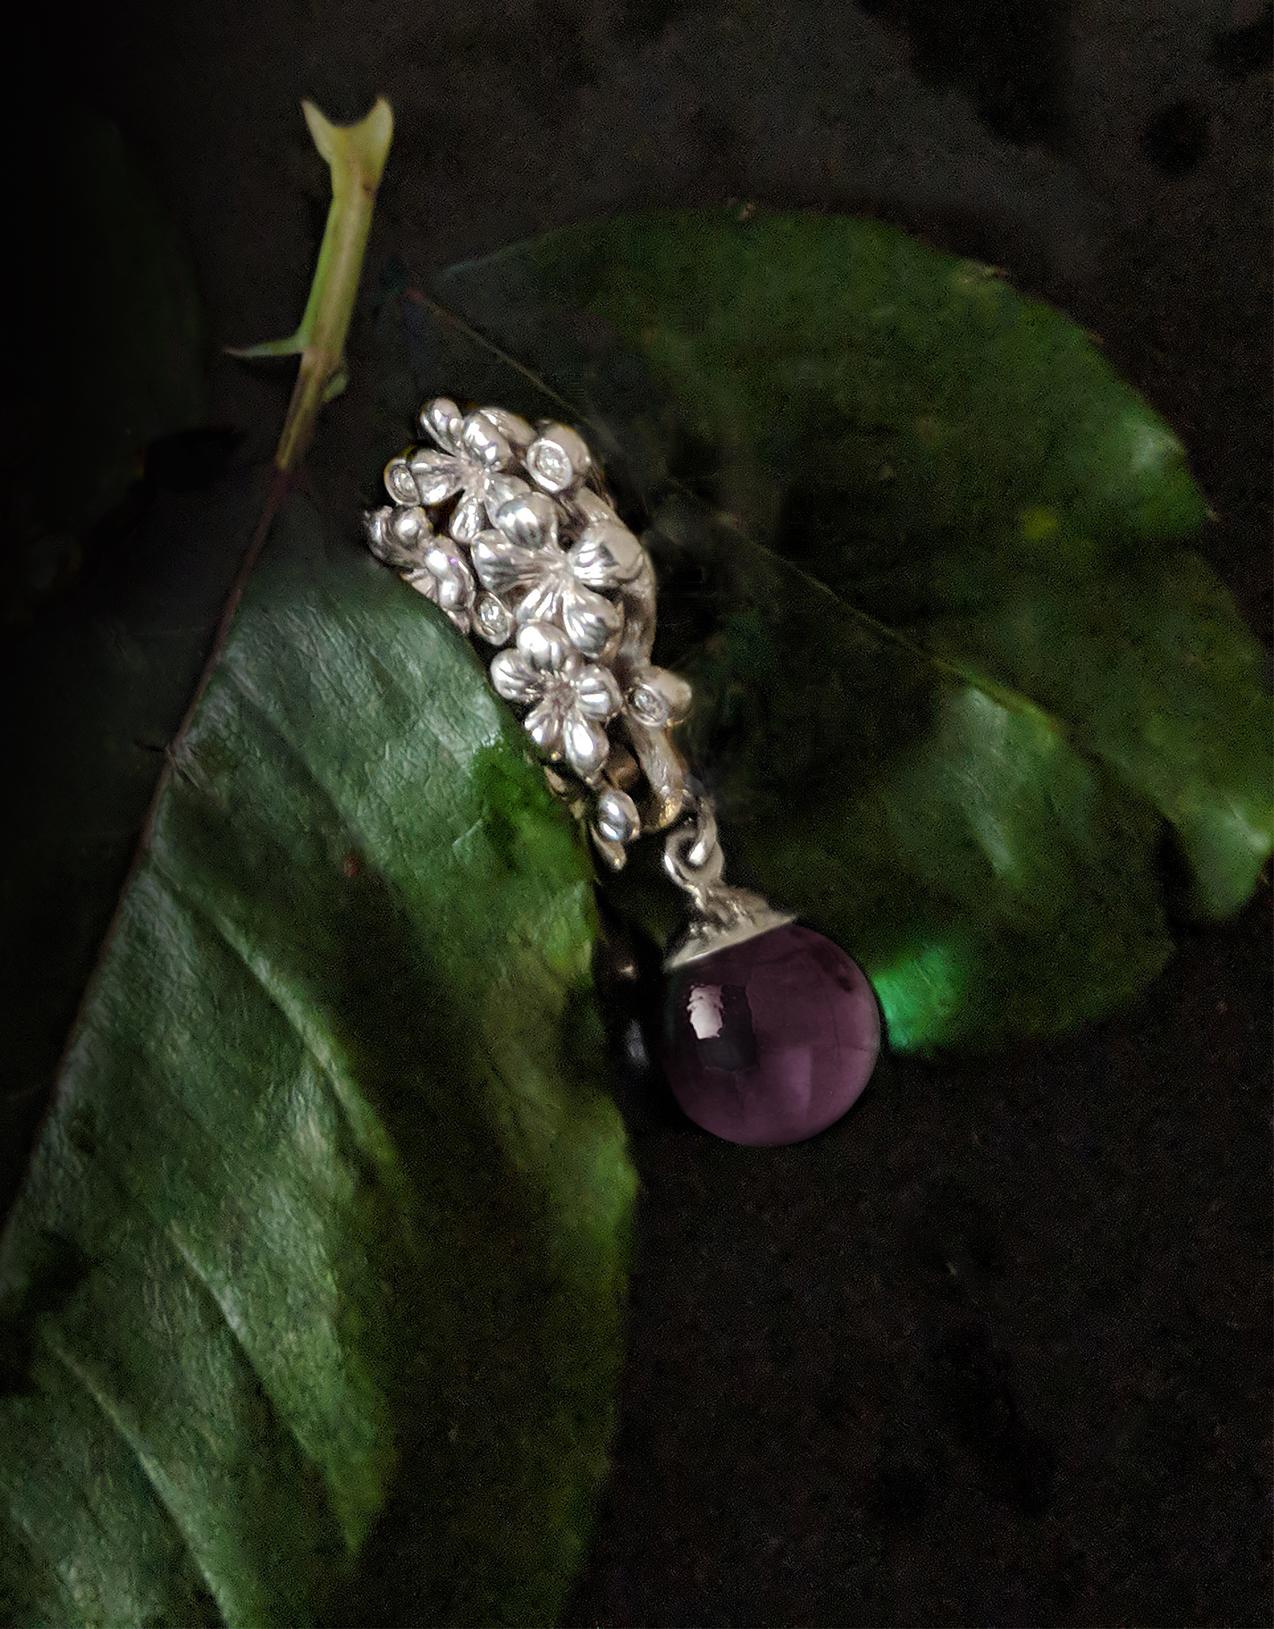 The 14 karat white gold Plum Blossom pendant necklace is encrusted with five round diamonds and a cabochon rose quartz drop, and has been featured in a review by Vogue UA. We use only top-quality natural diamonds of VS clarity and F-G color, sourced